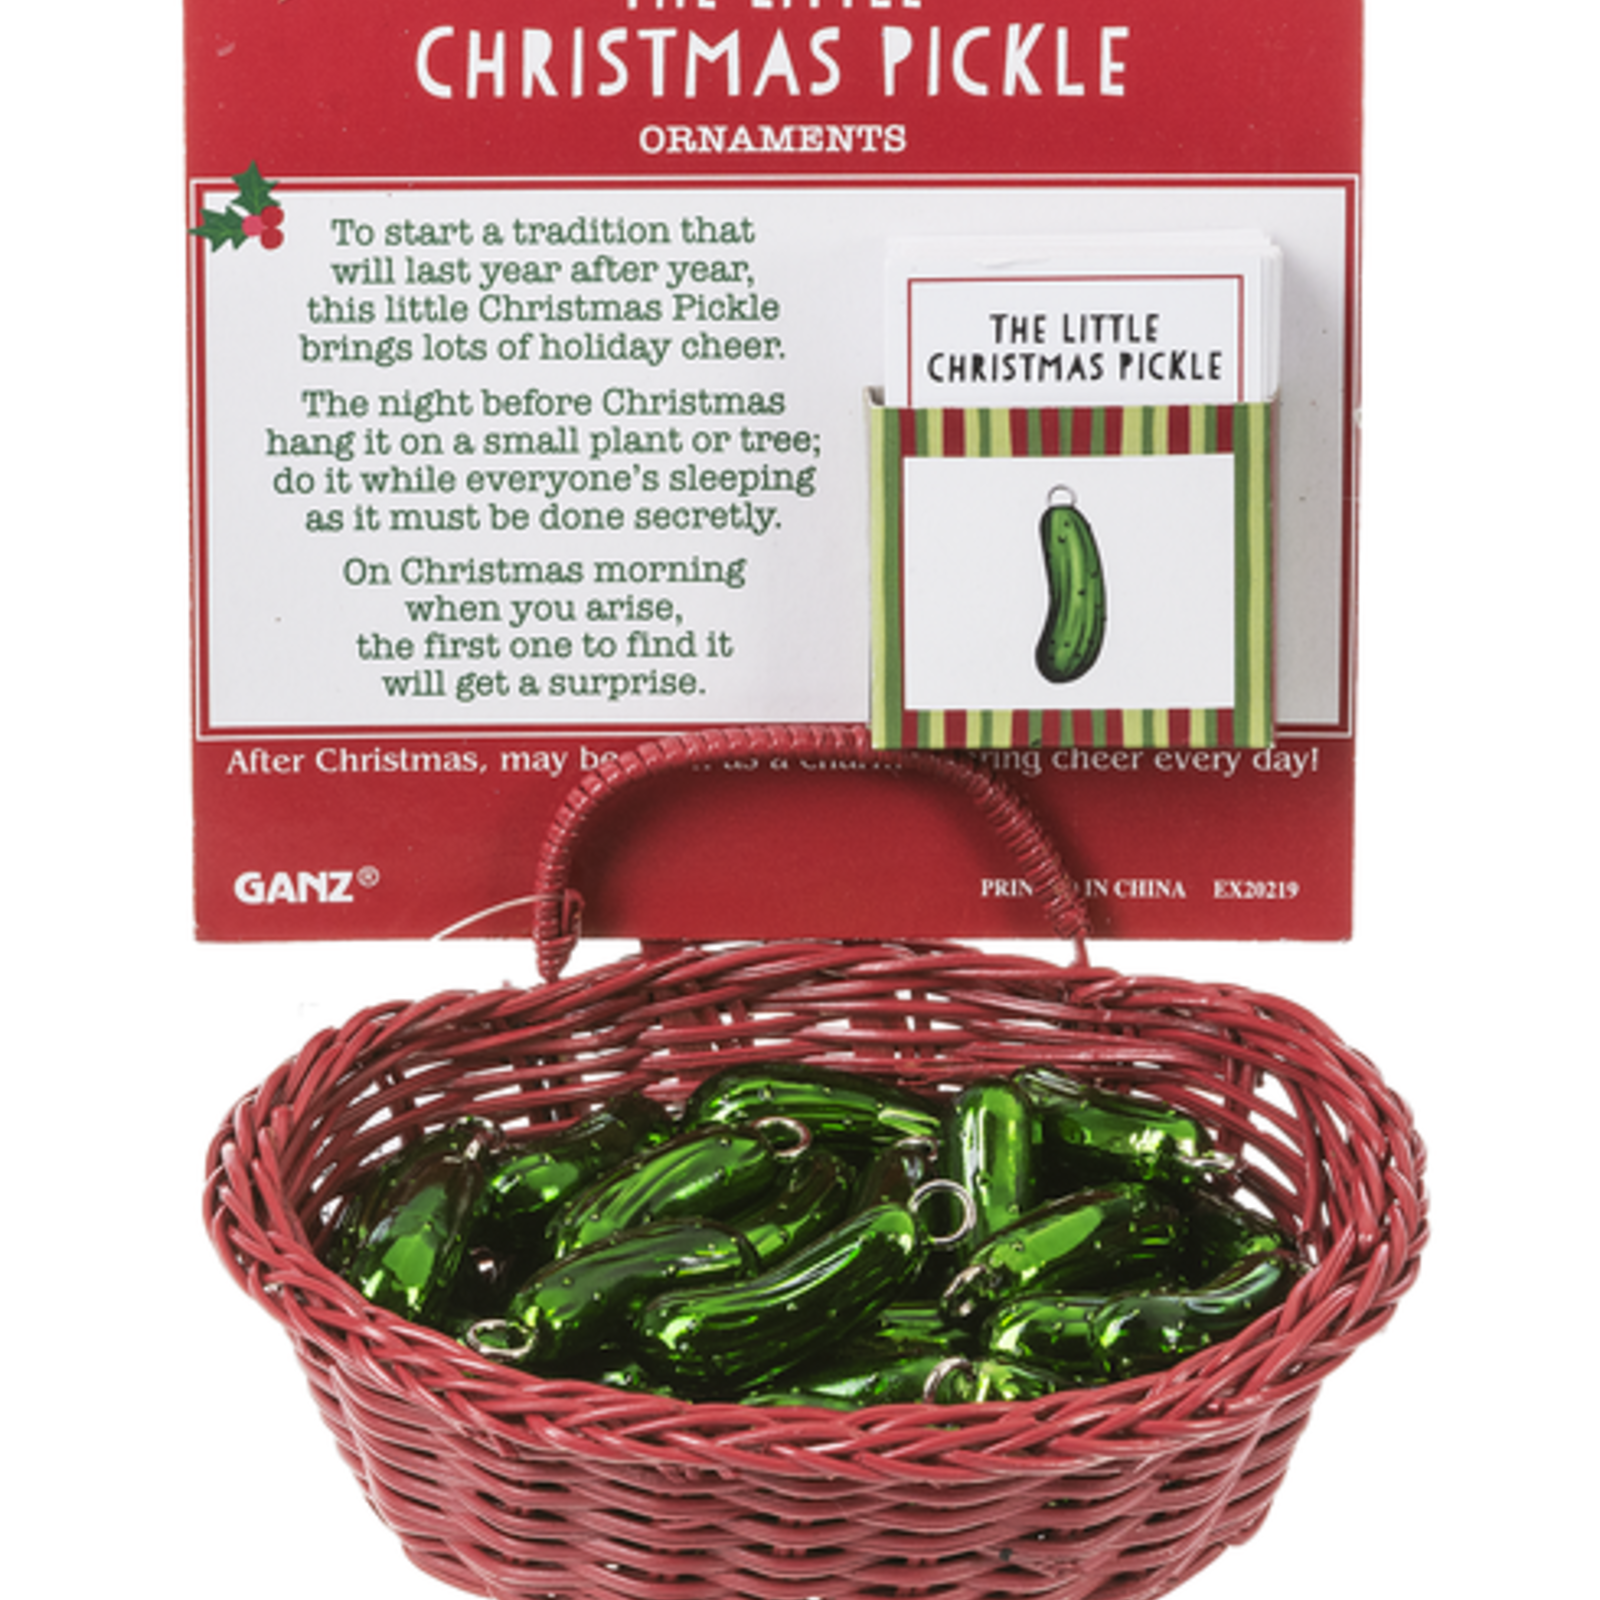 Ganz The Little Christmas Pickle Ornaments in a Basket   EX20219 loading=